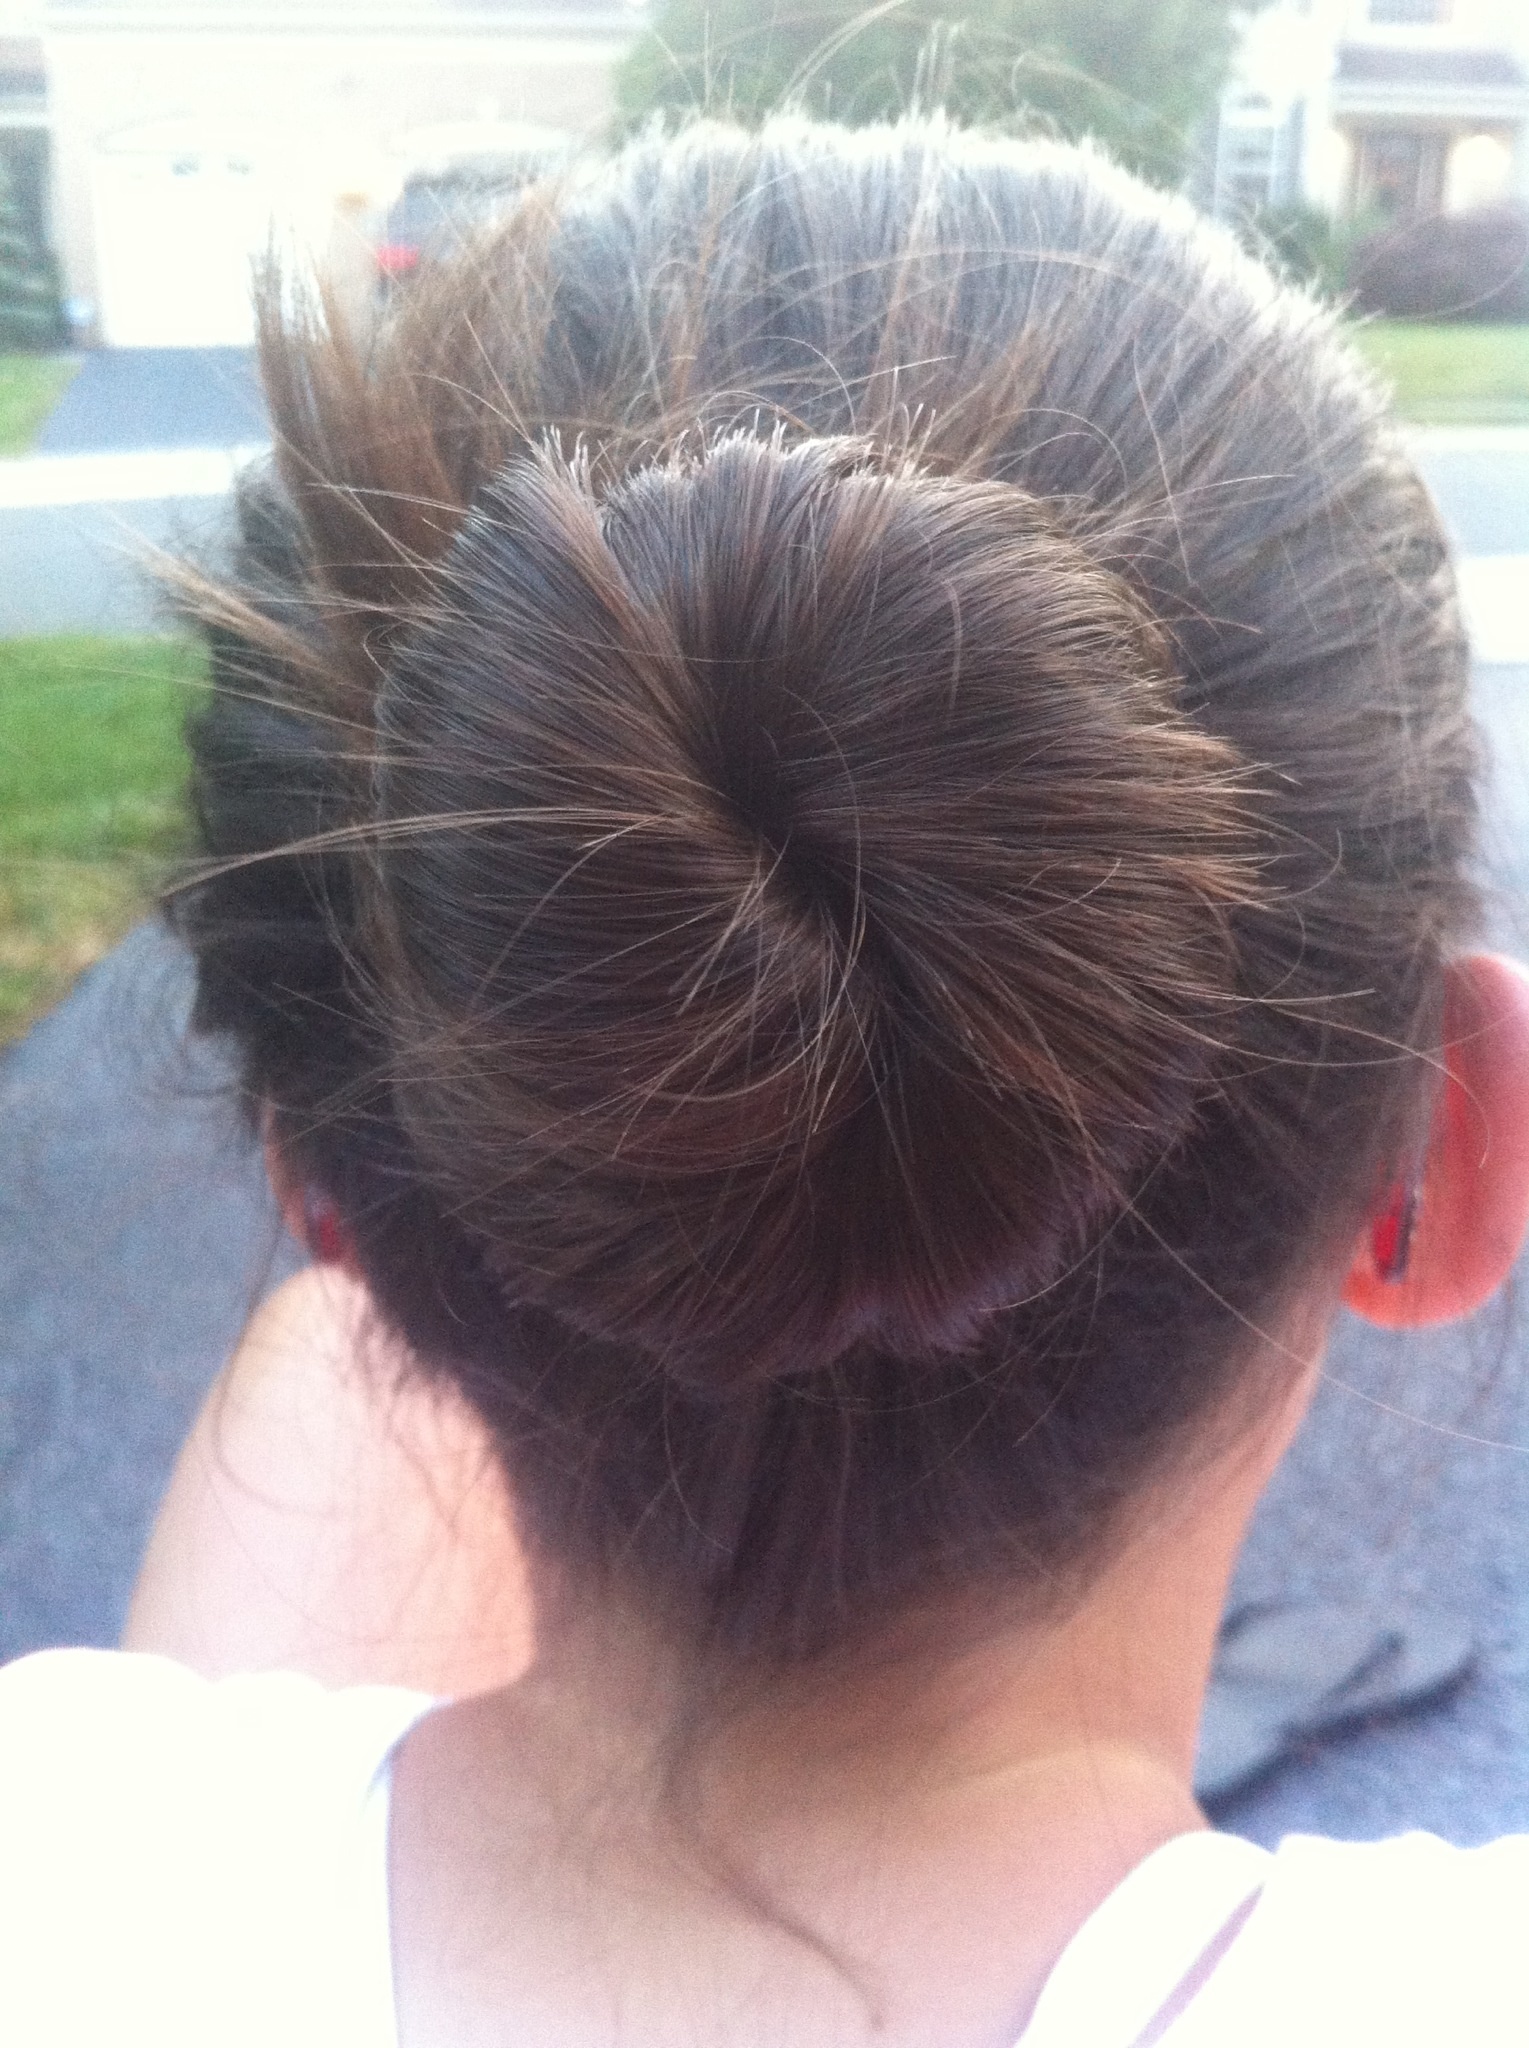 How to put your hair in a bun - B+C Guides